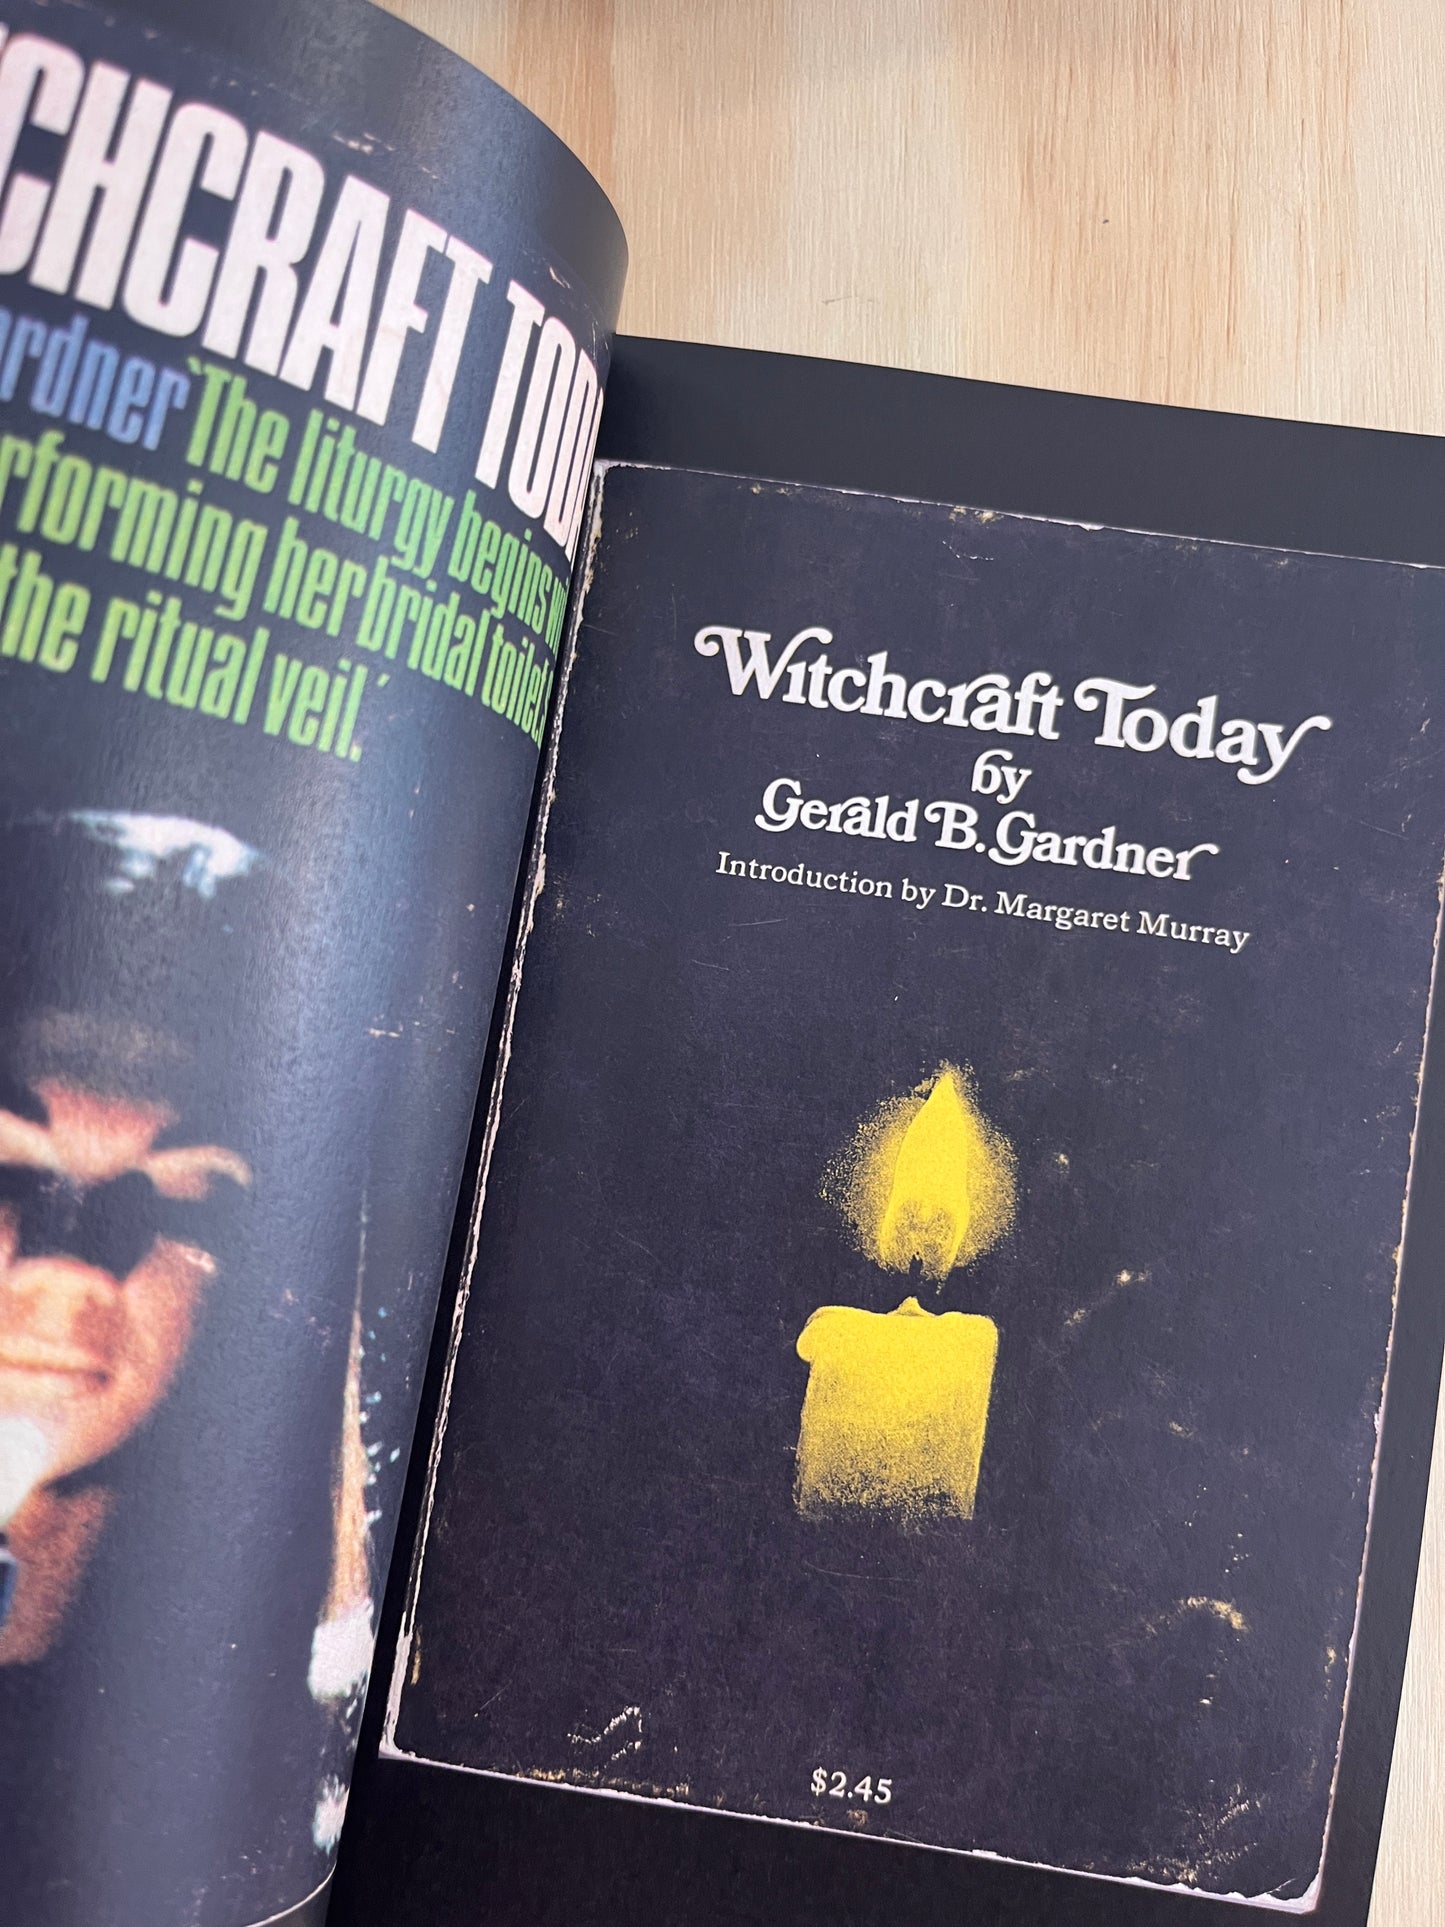 Spell Bound: Exploring Witchcraft and the Occult Through Vintage Paperbacks (3rd Printing)